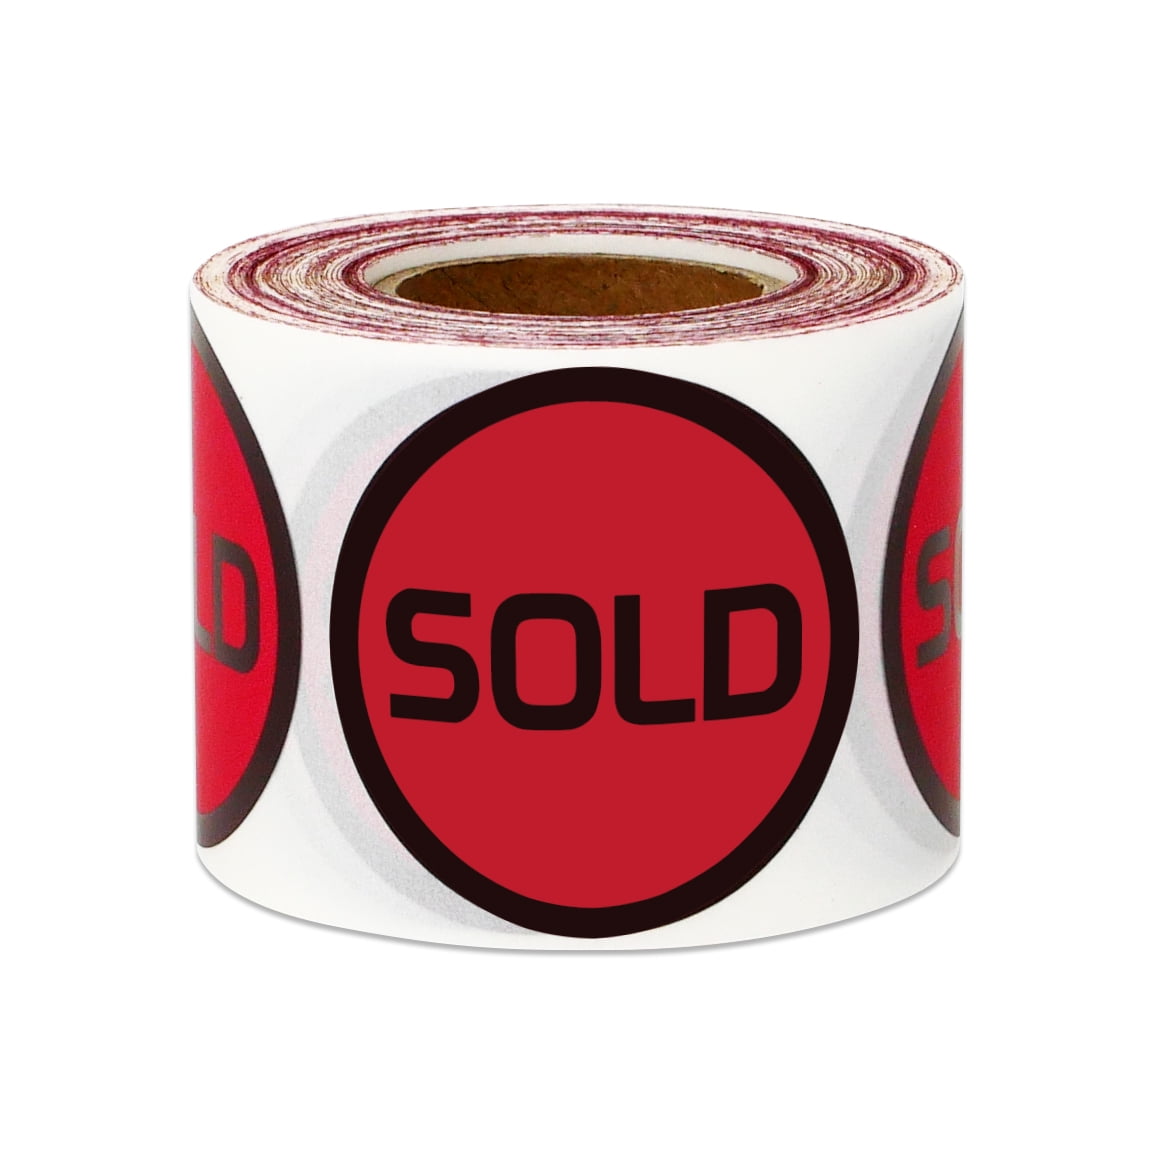 1 Roll of 1000 Labels 1 Round Red New Point of Sale Pricing Inventory Control Retail Stickers 